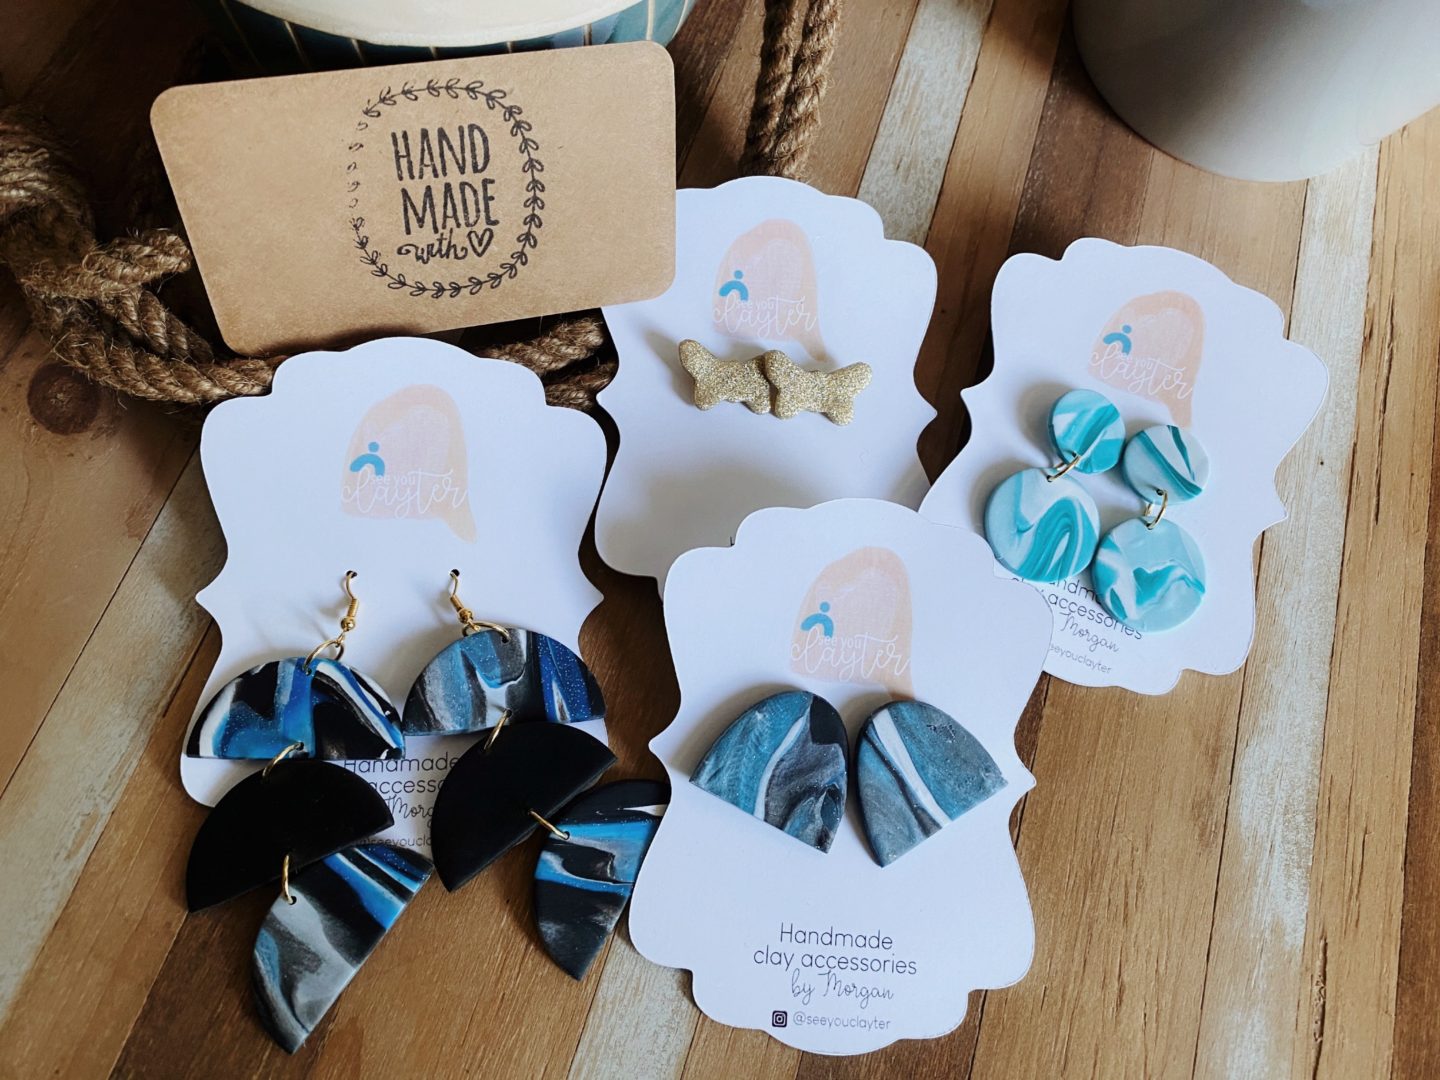 See You Clayter: Handmade Polymer Clay Statement Earrings and Accessories -  Lex Paige